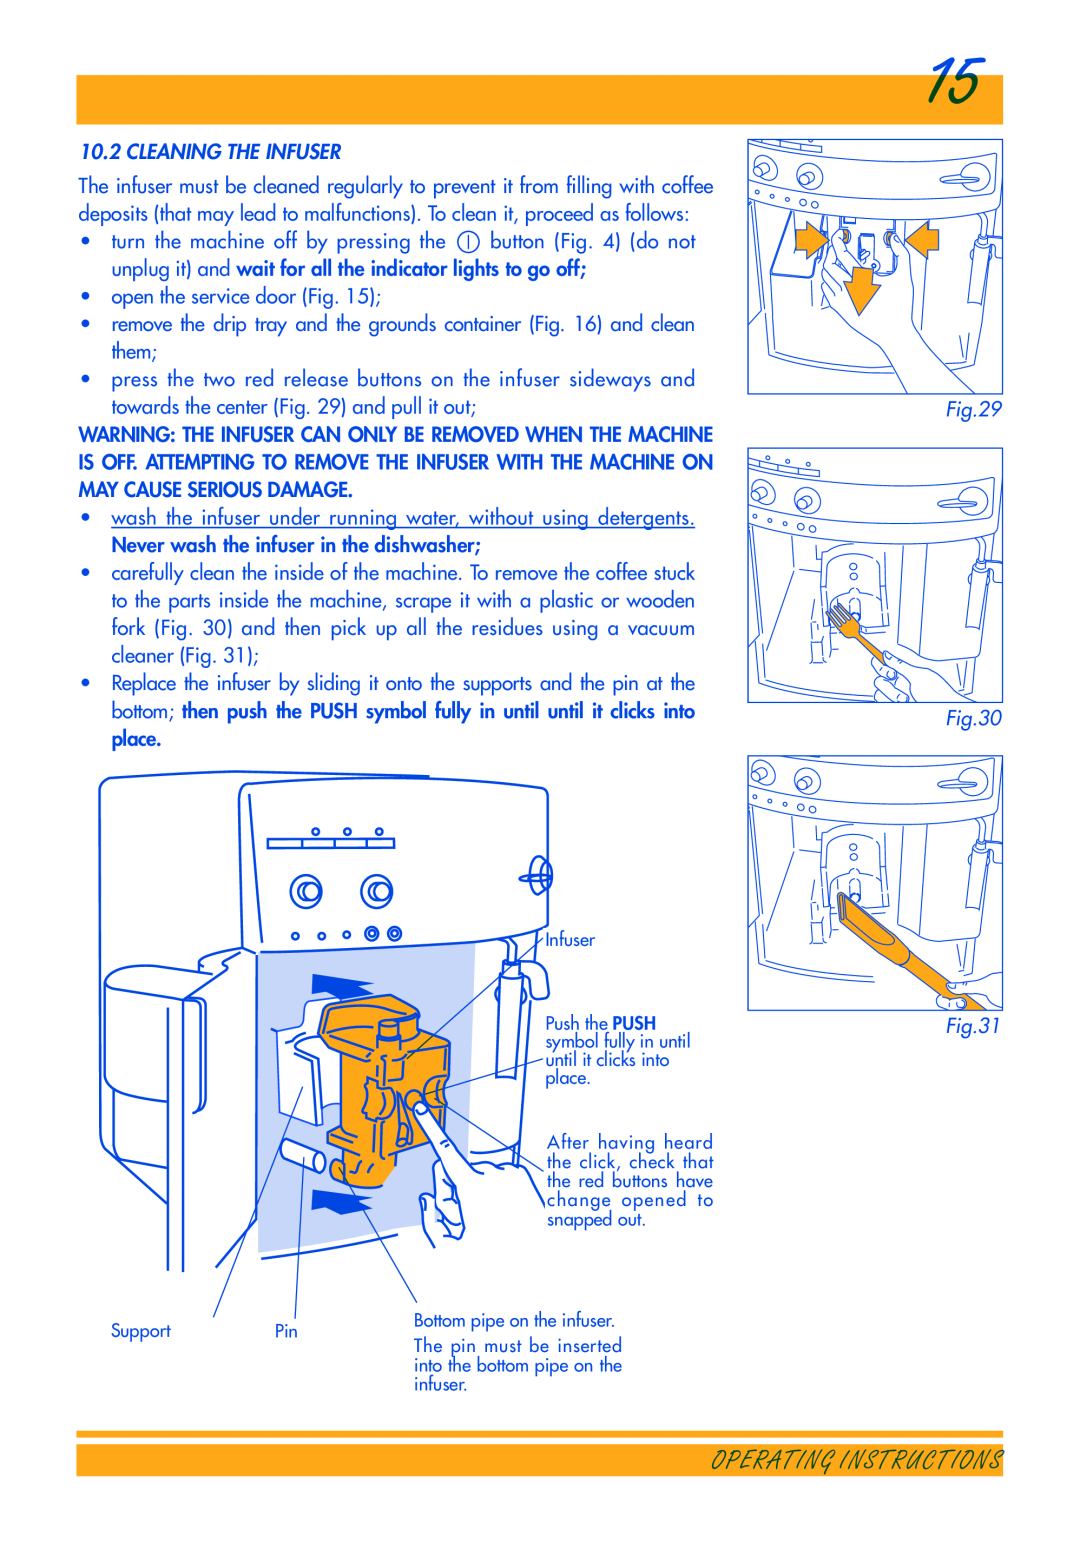 DeLonghi ESAM3300 manual Cleaning The Infuser, Operating Instructions, open the service door Fig 